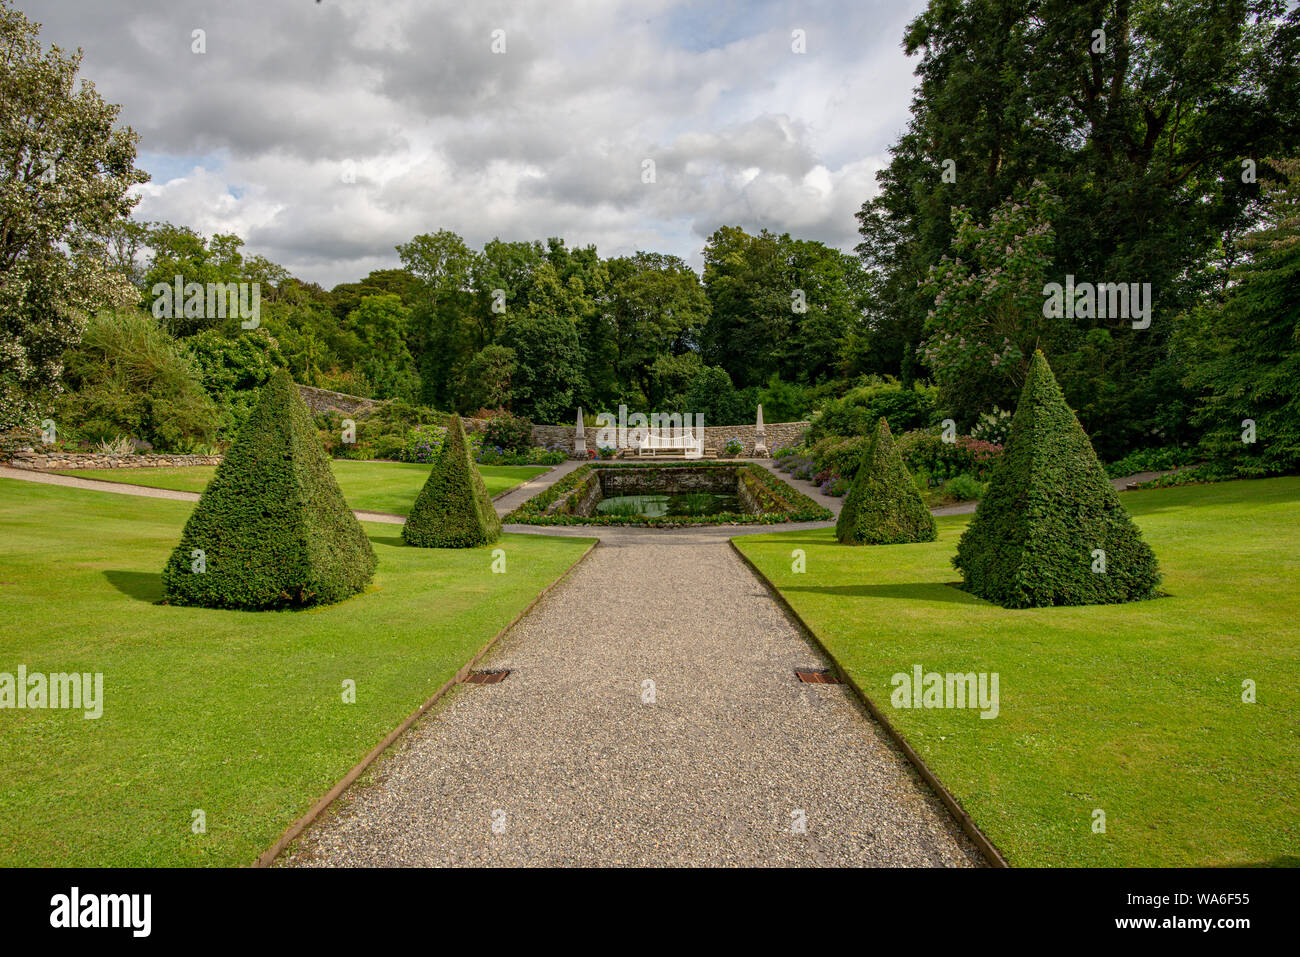 Menai Bridge, Wales, UK - Aug 15, 2019: Far view of the central perspective of the formal garden of the Plas Cadnant Estate Stock Photo